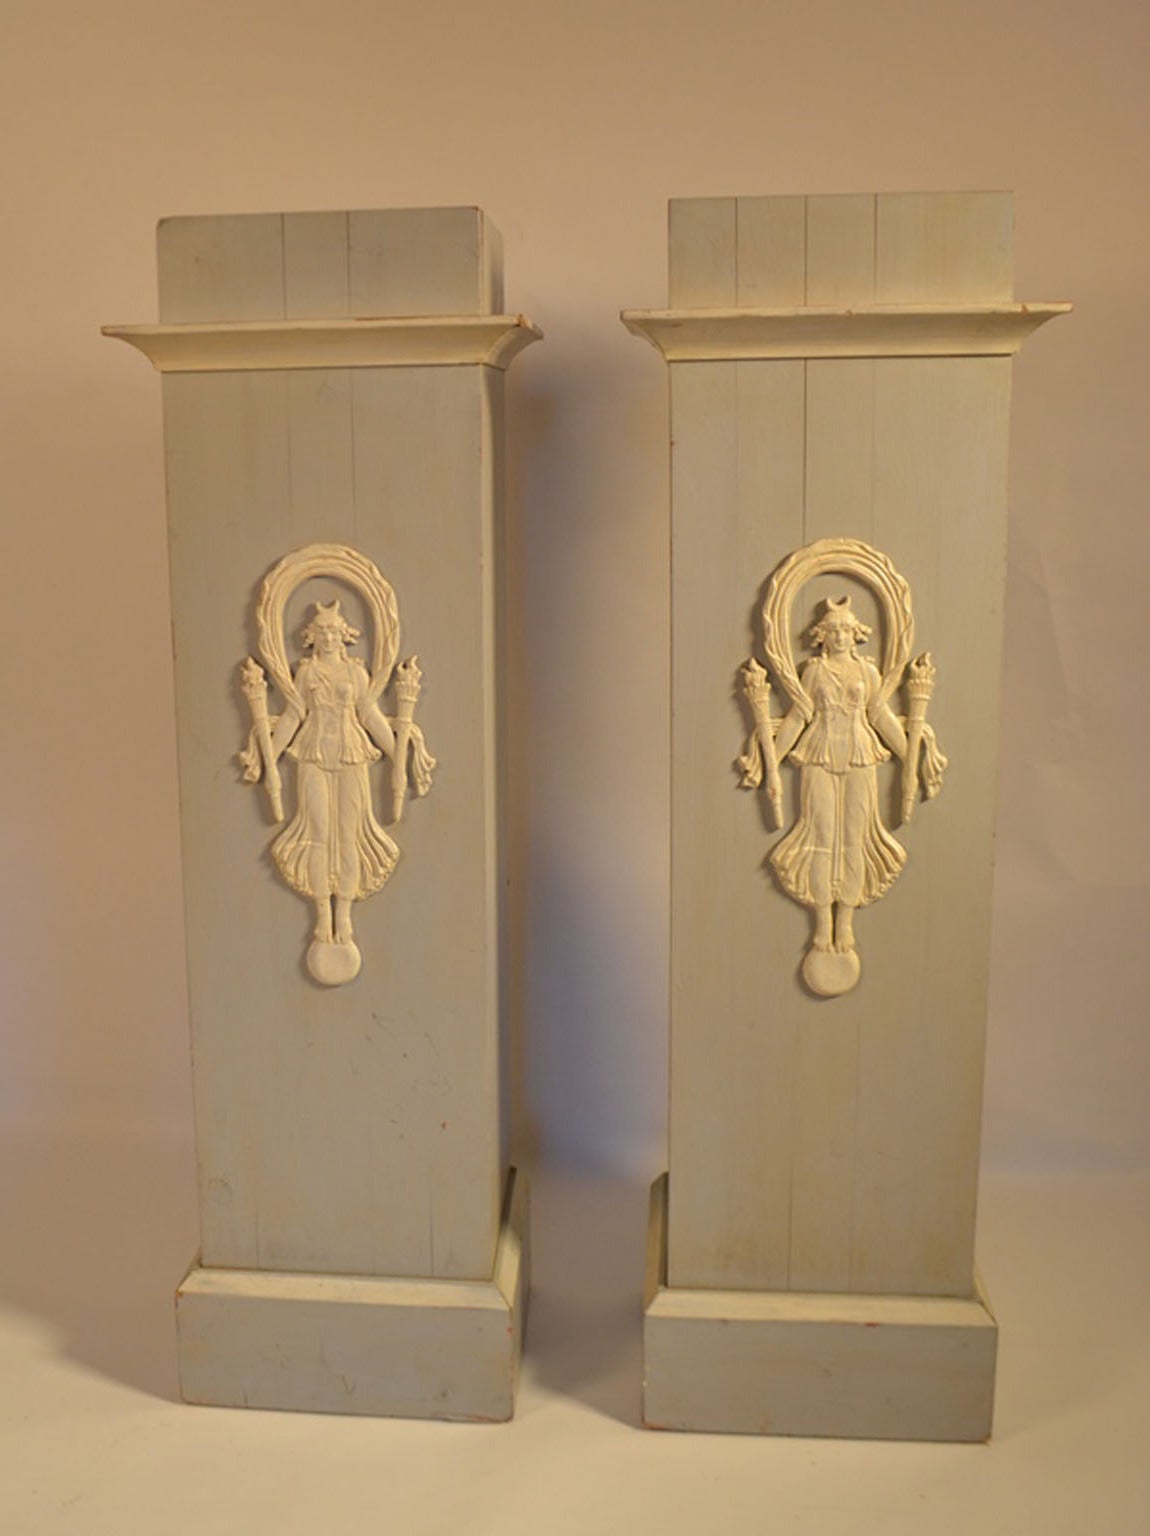 Contemporary pair of Decorative French Pedestals with carved Indochine figures holding torches.